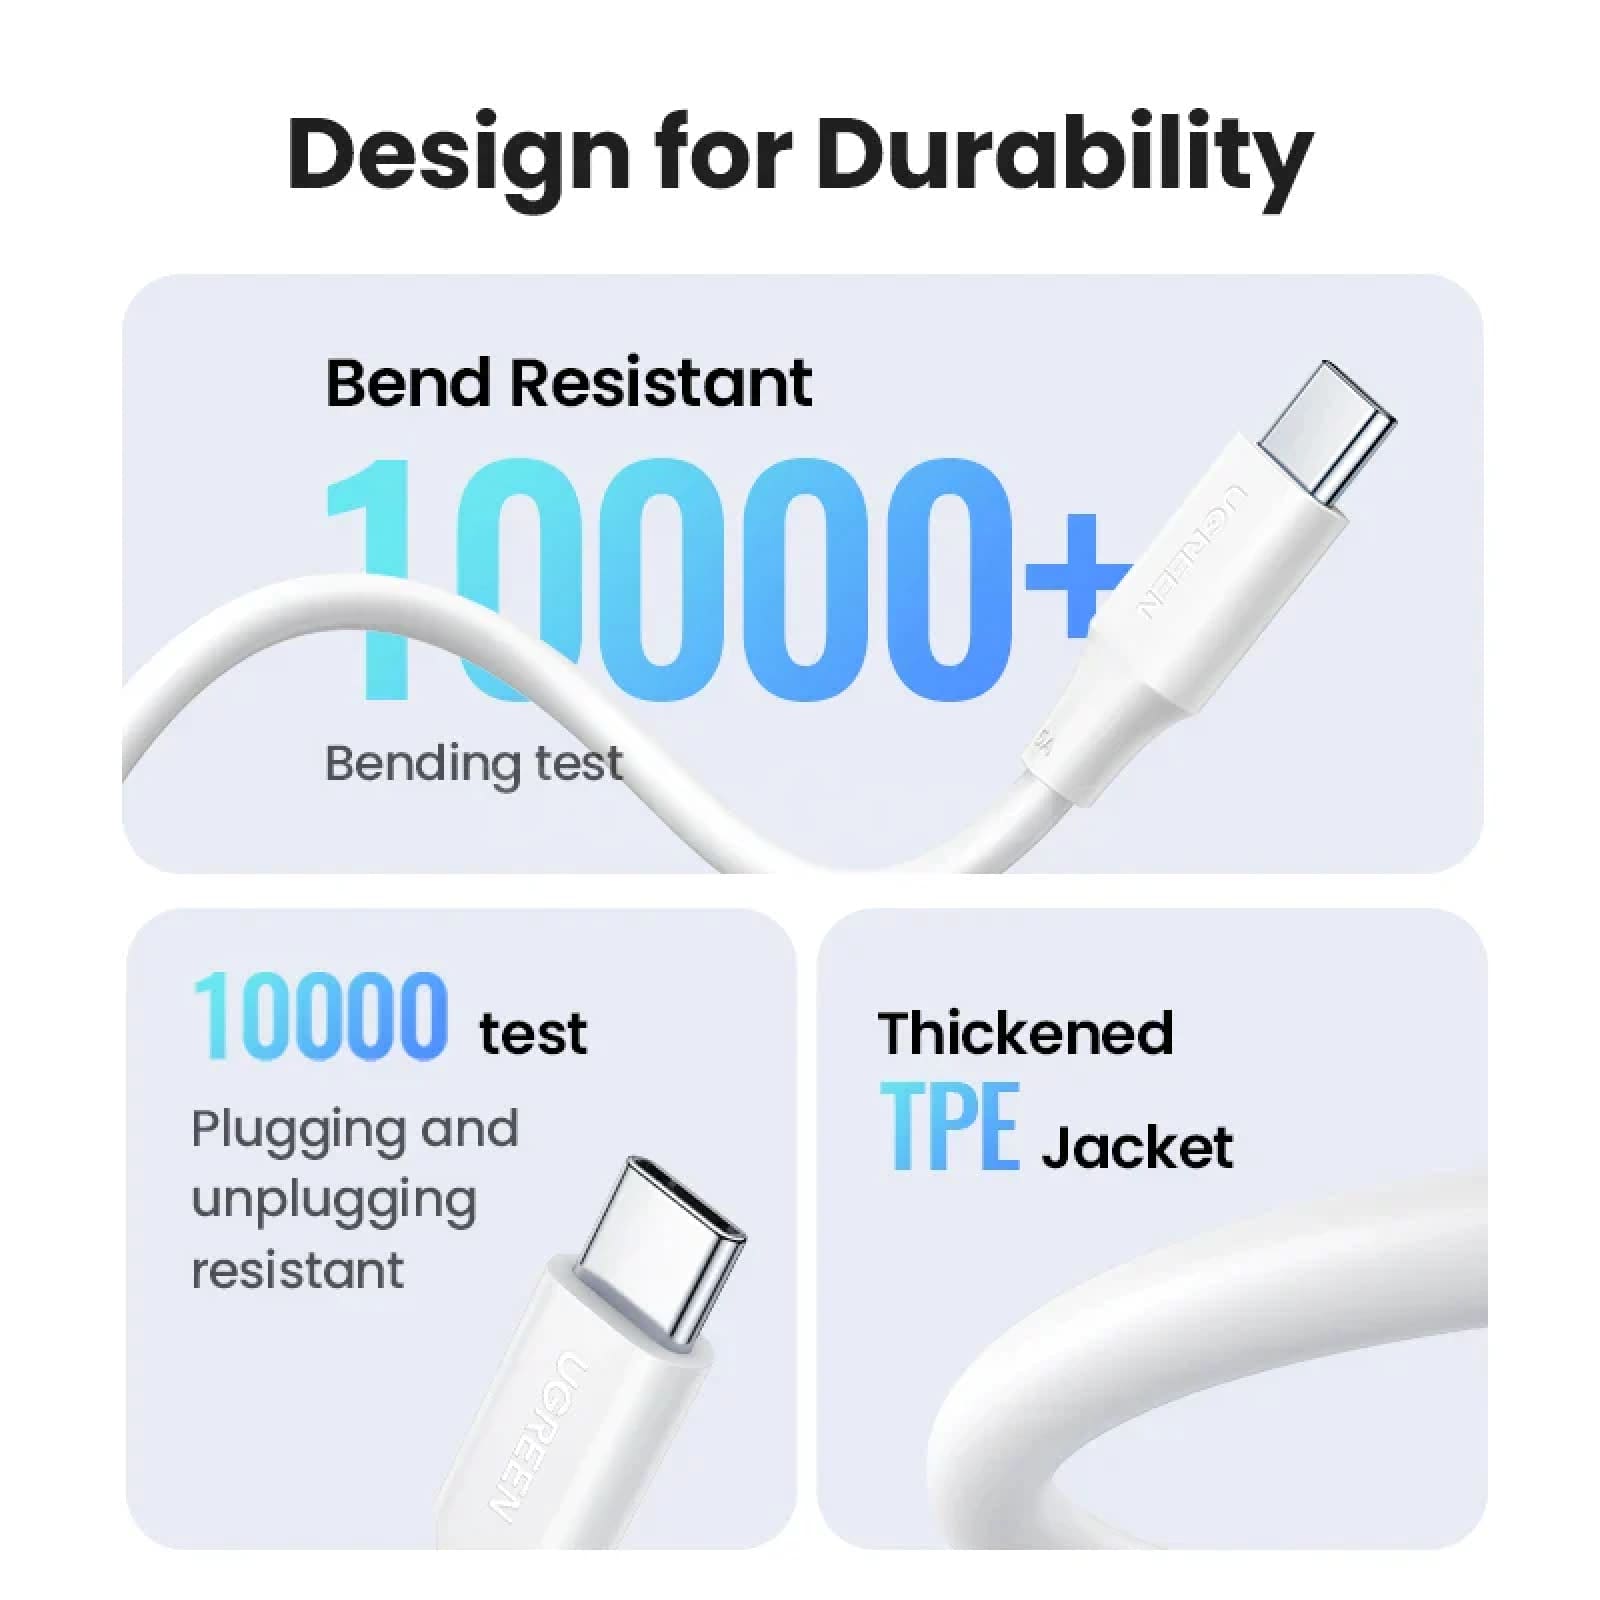 Ugreen 100W Usb C Cable Macbook Pro Samsung Galaxy 5A Fast Charging E-Marker 301635